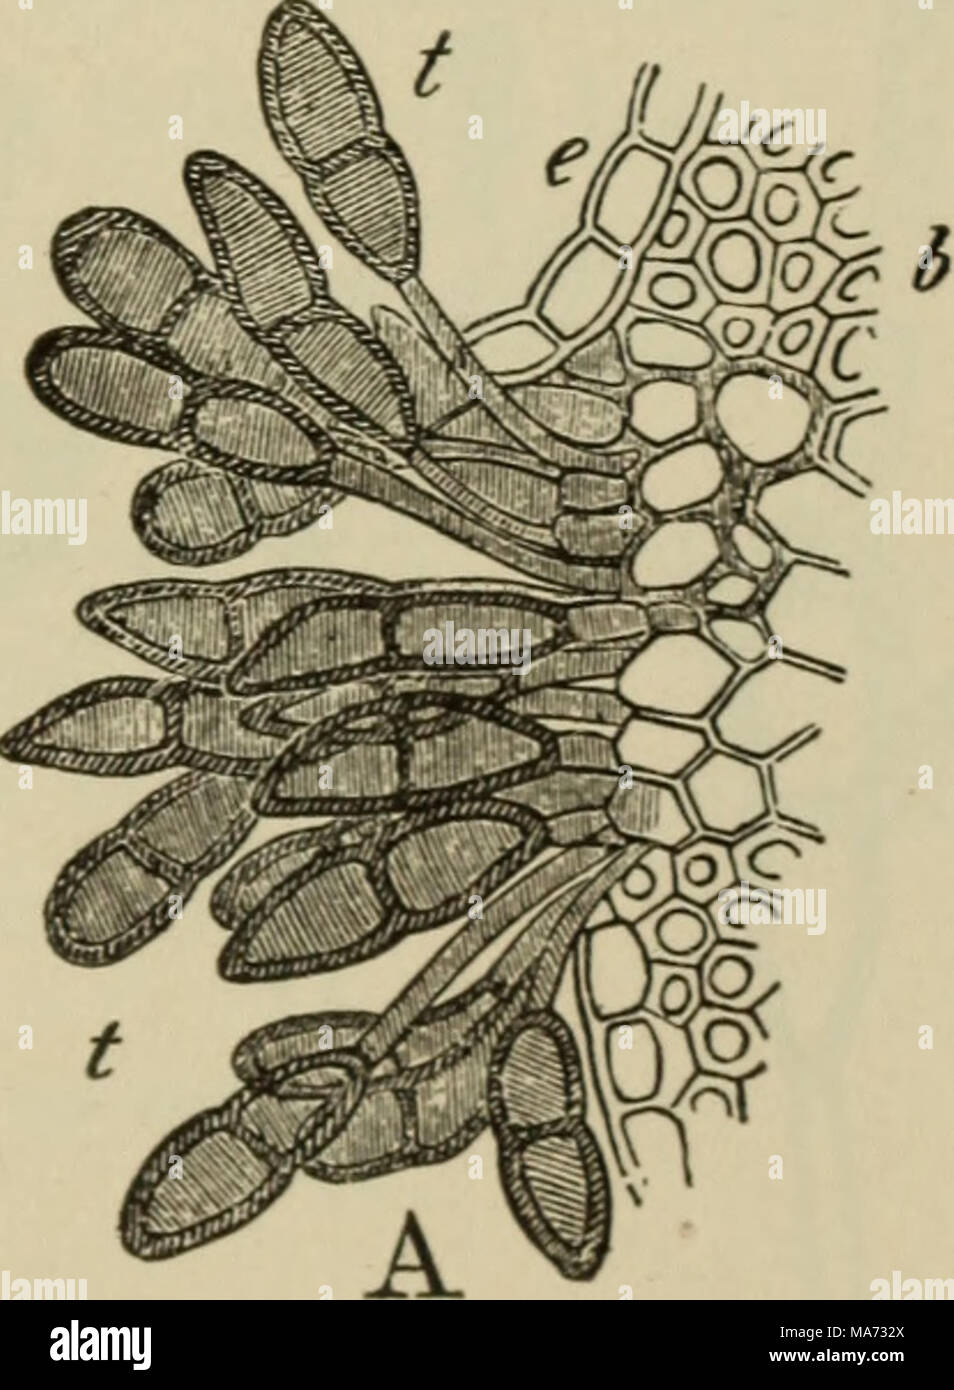 . Elementary botany . Fig. 158. ^.section through sorus of black rust of wheat, showing teleutospores. /&gt;, mycelium bearing both teleutospores and uredospores. &lt; Alter de Bary.) one season, so this is the form in which the fungus is greatly multiplied and widely distributed. Stock Photo